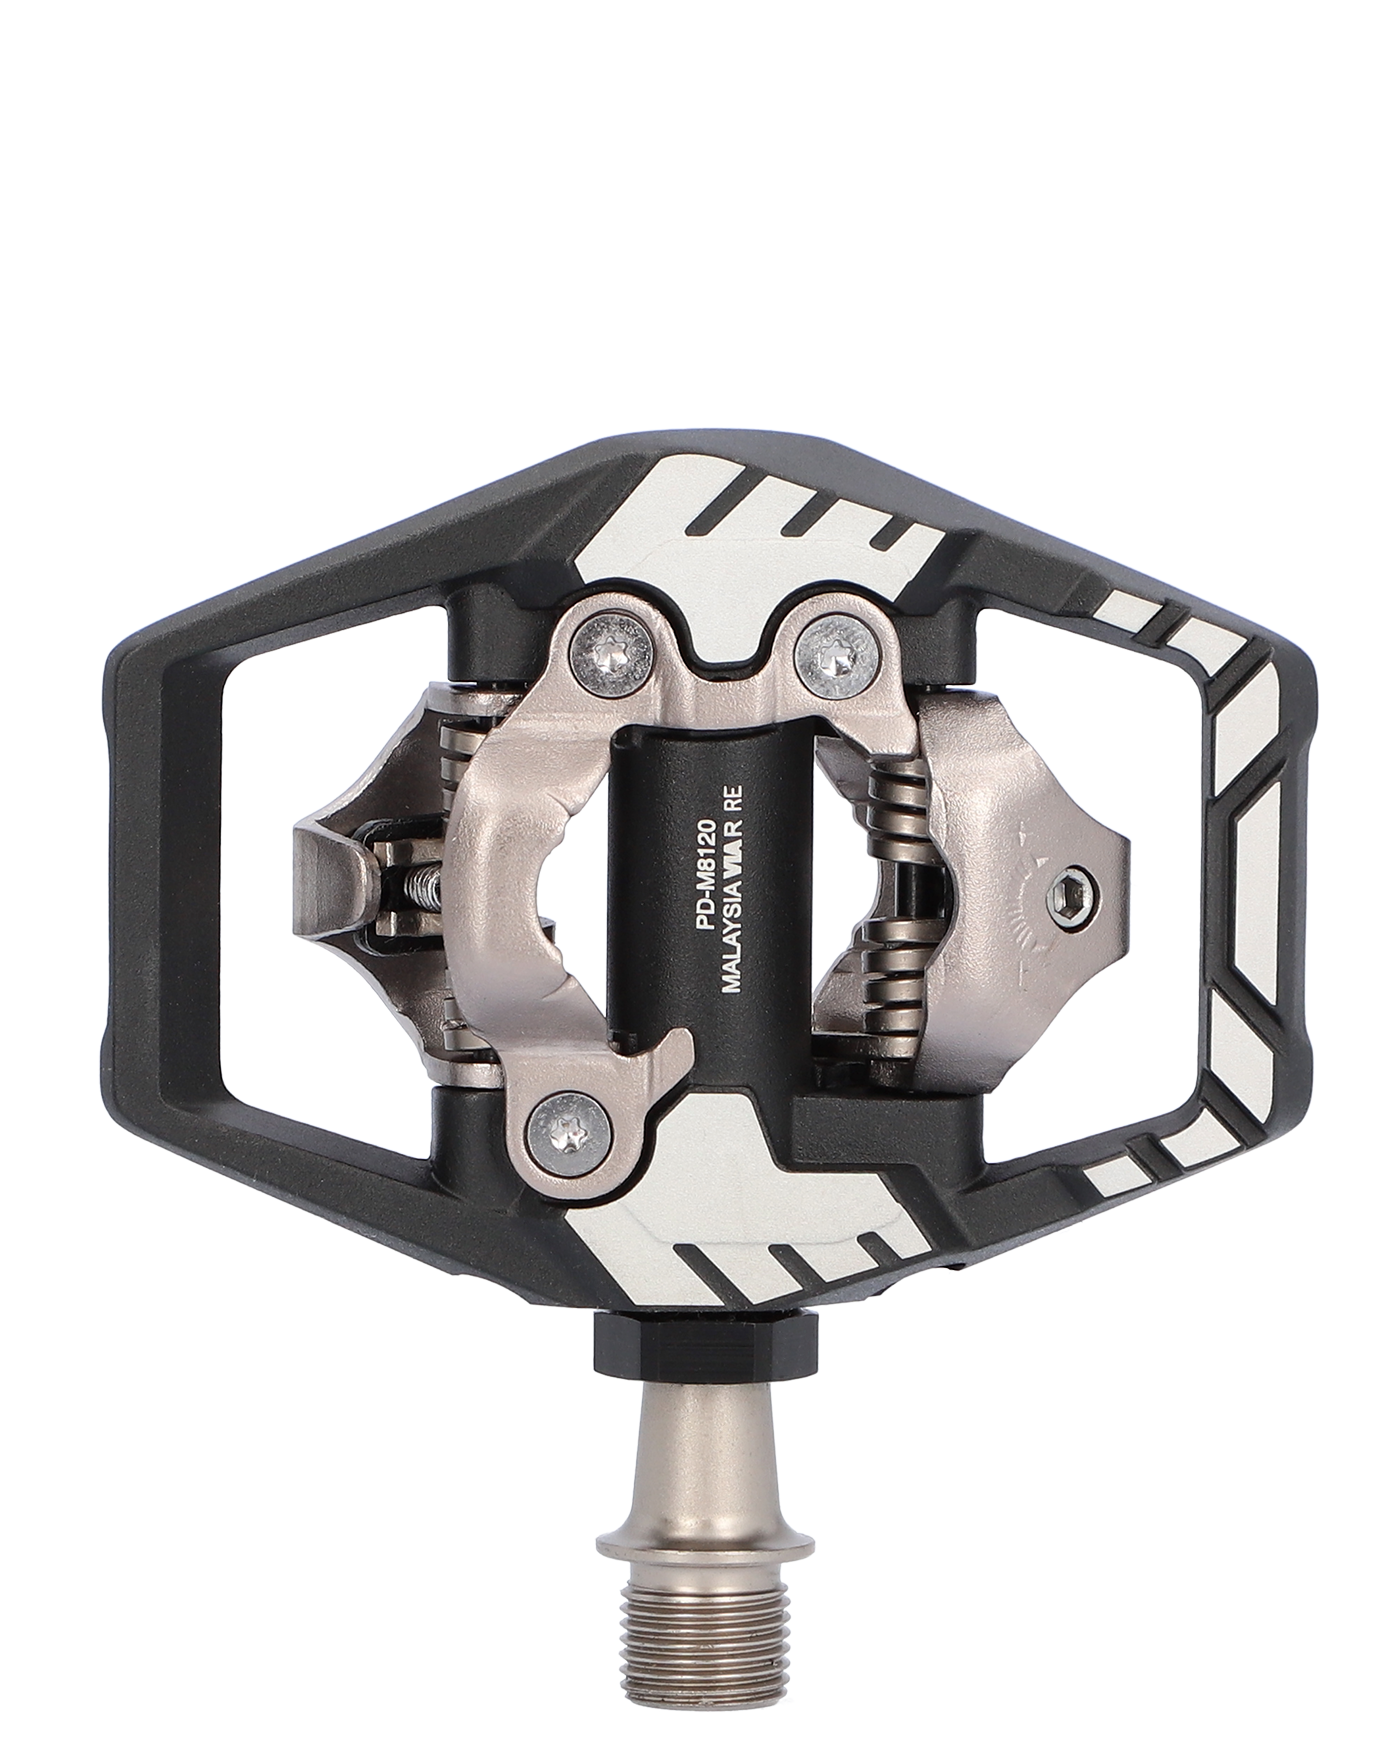 shimano deore pedals